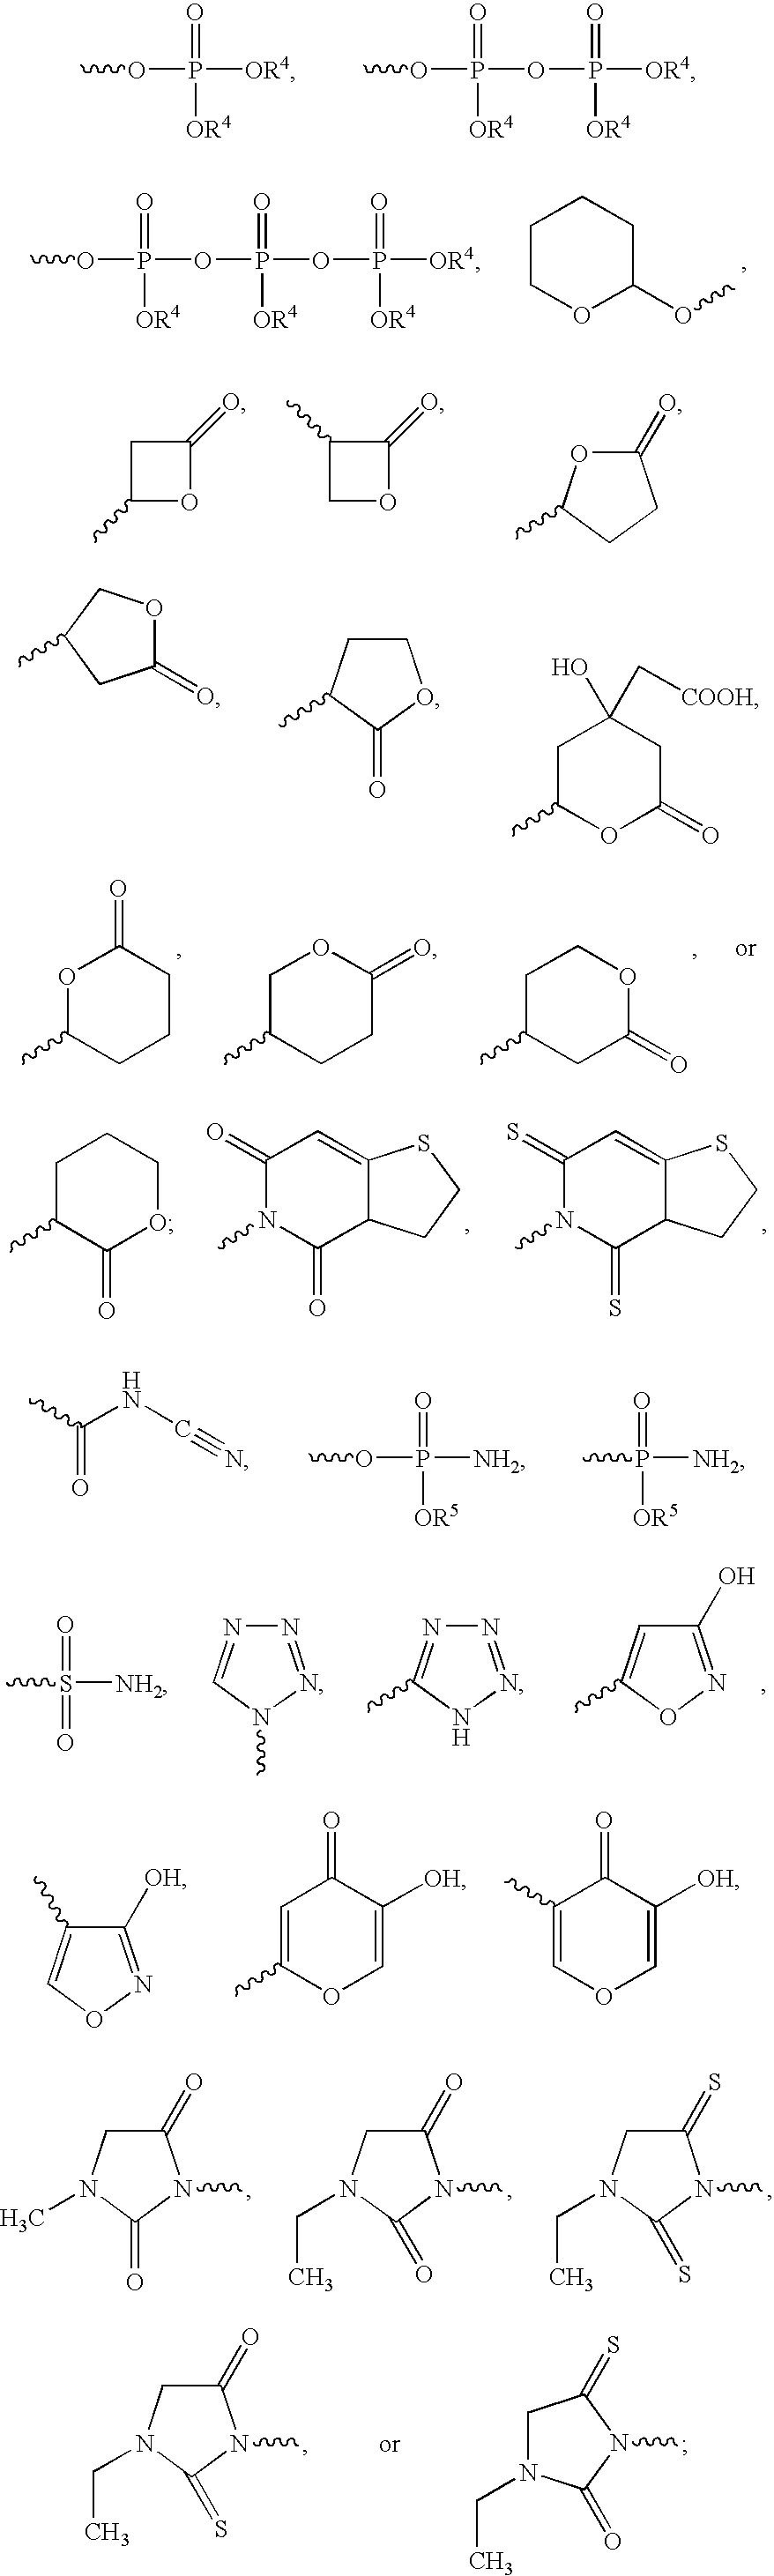 Cycloalkyl-hydroxyl compounds and compositions for cholesterol management and related uses